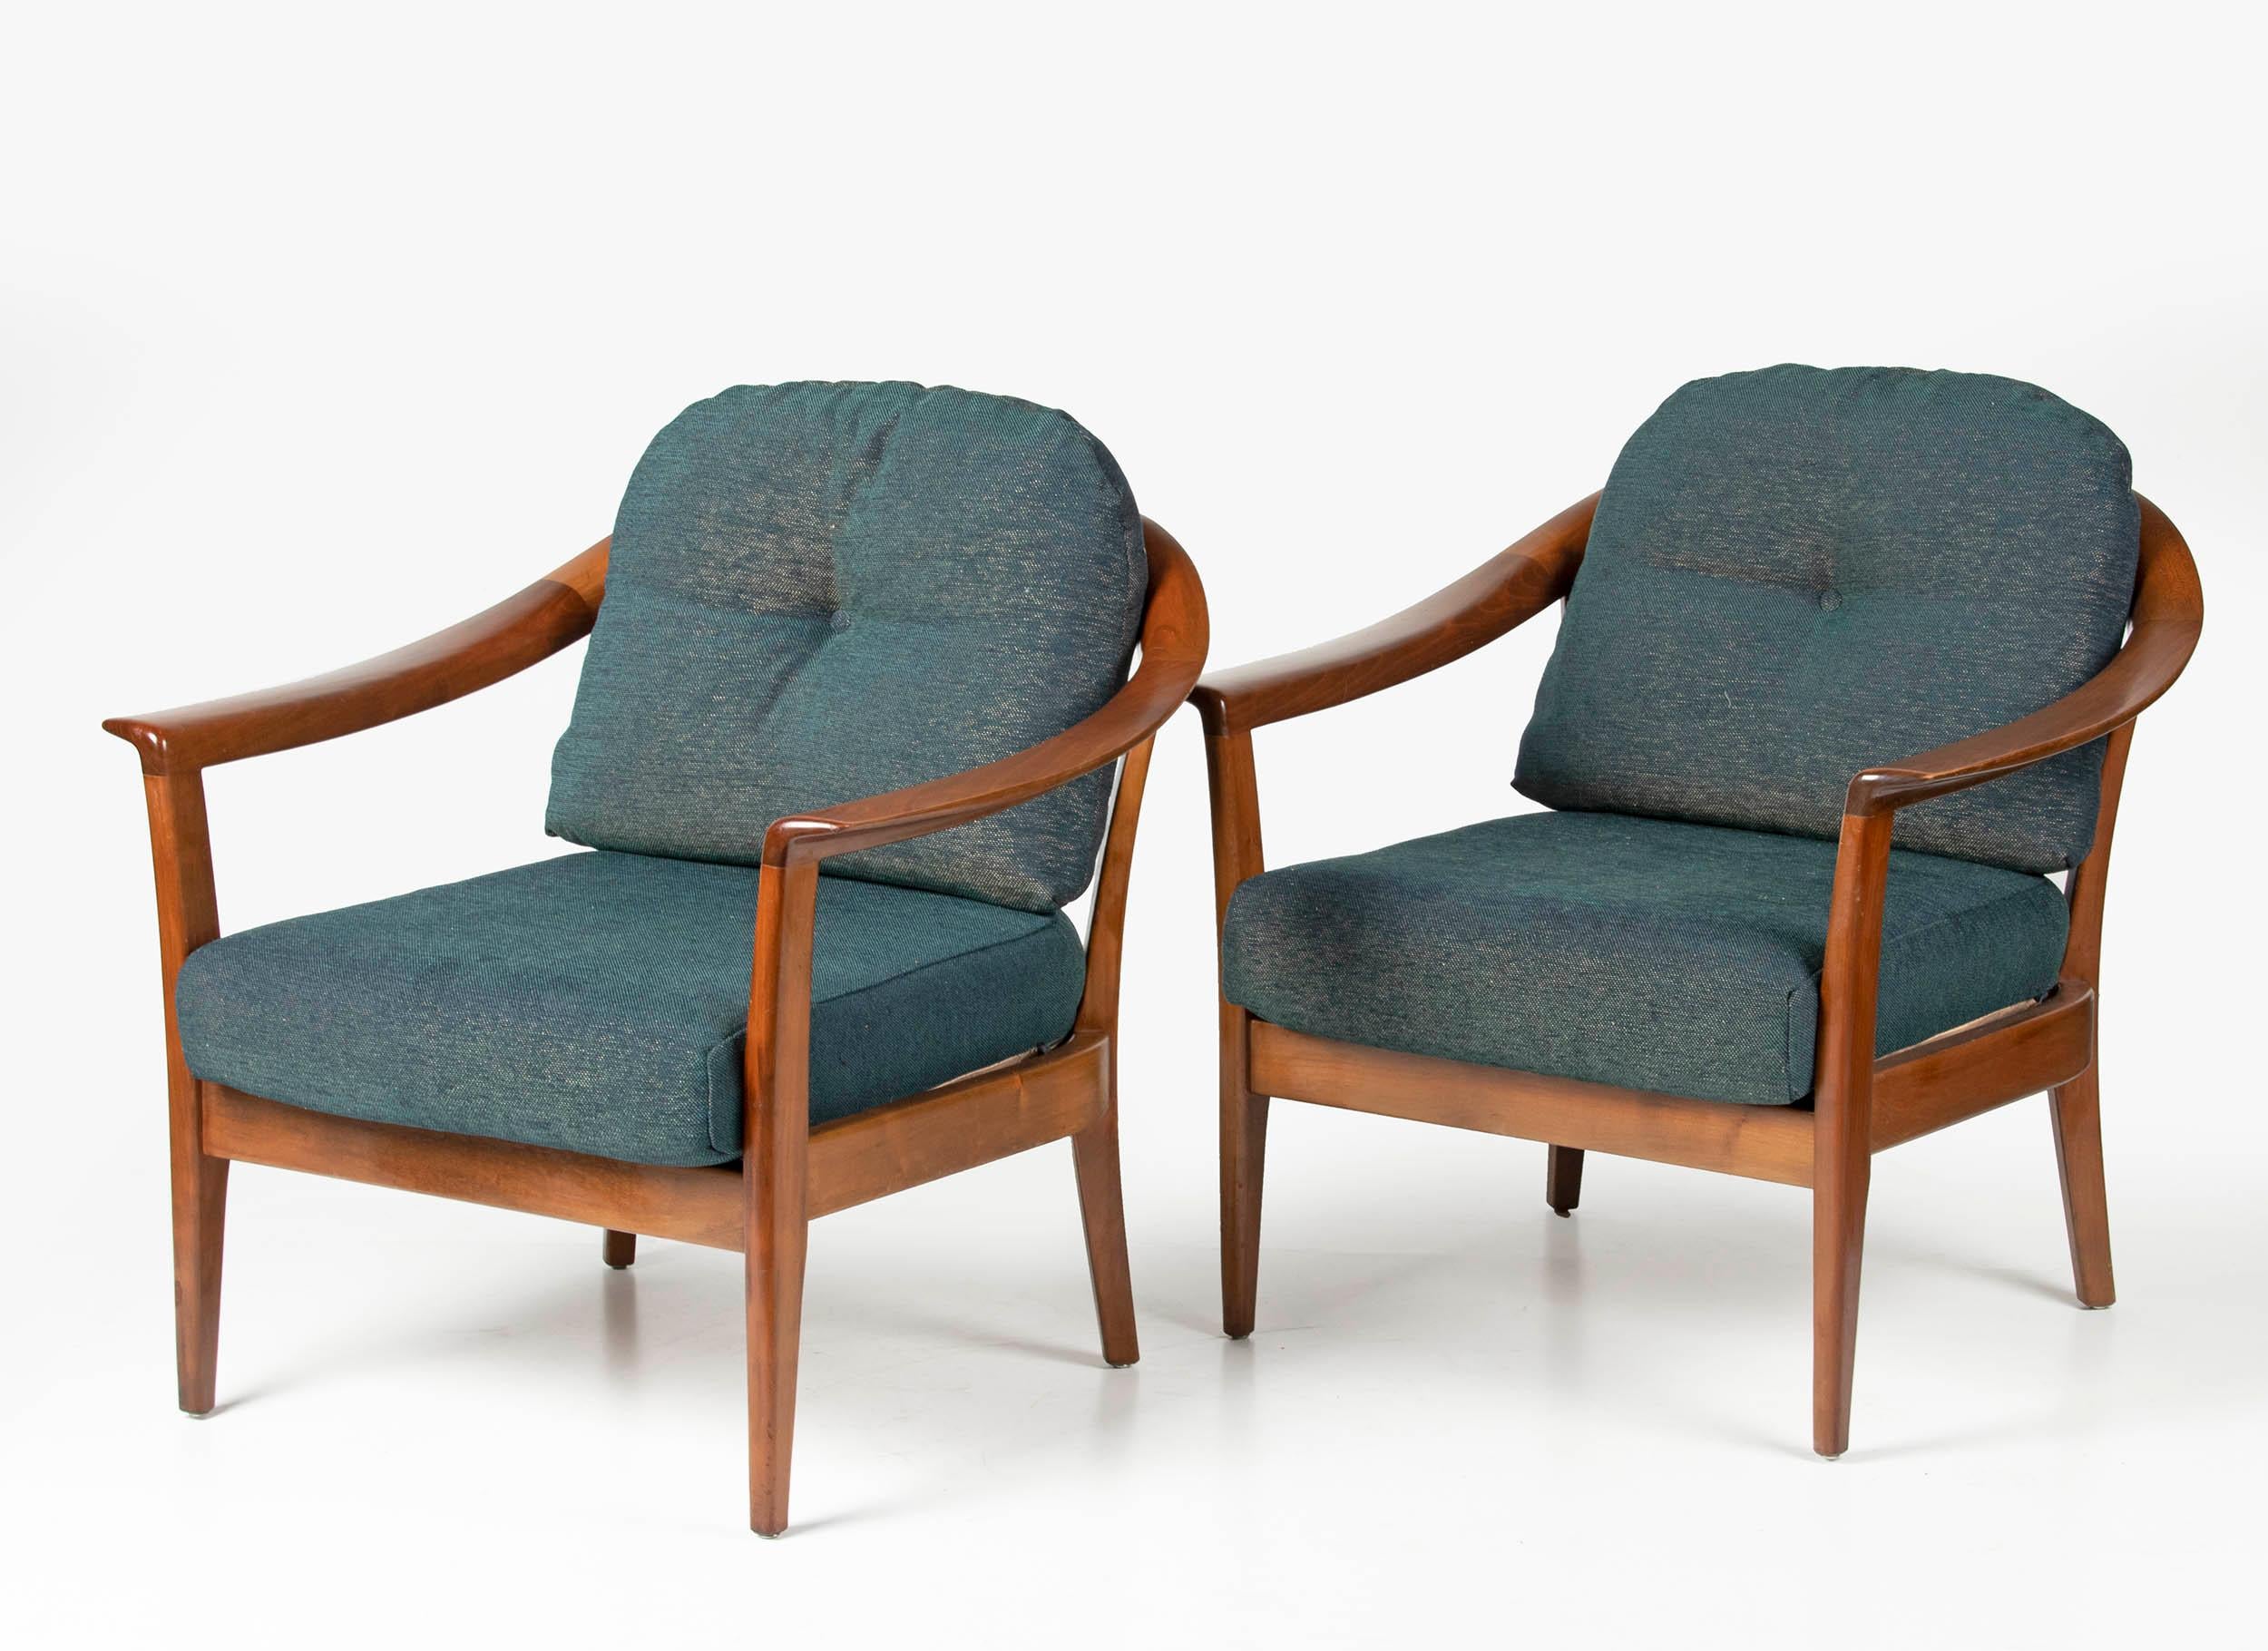 Two Cherrywood Easy Chairs with Sidetable made by Wilhelm Knoll Mid-20th Century 2